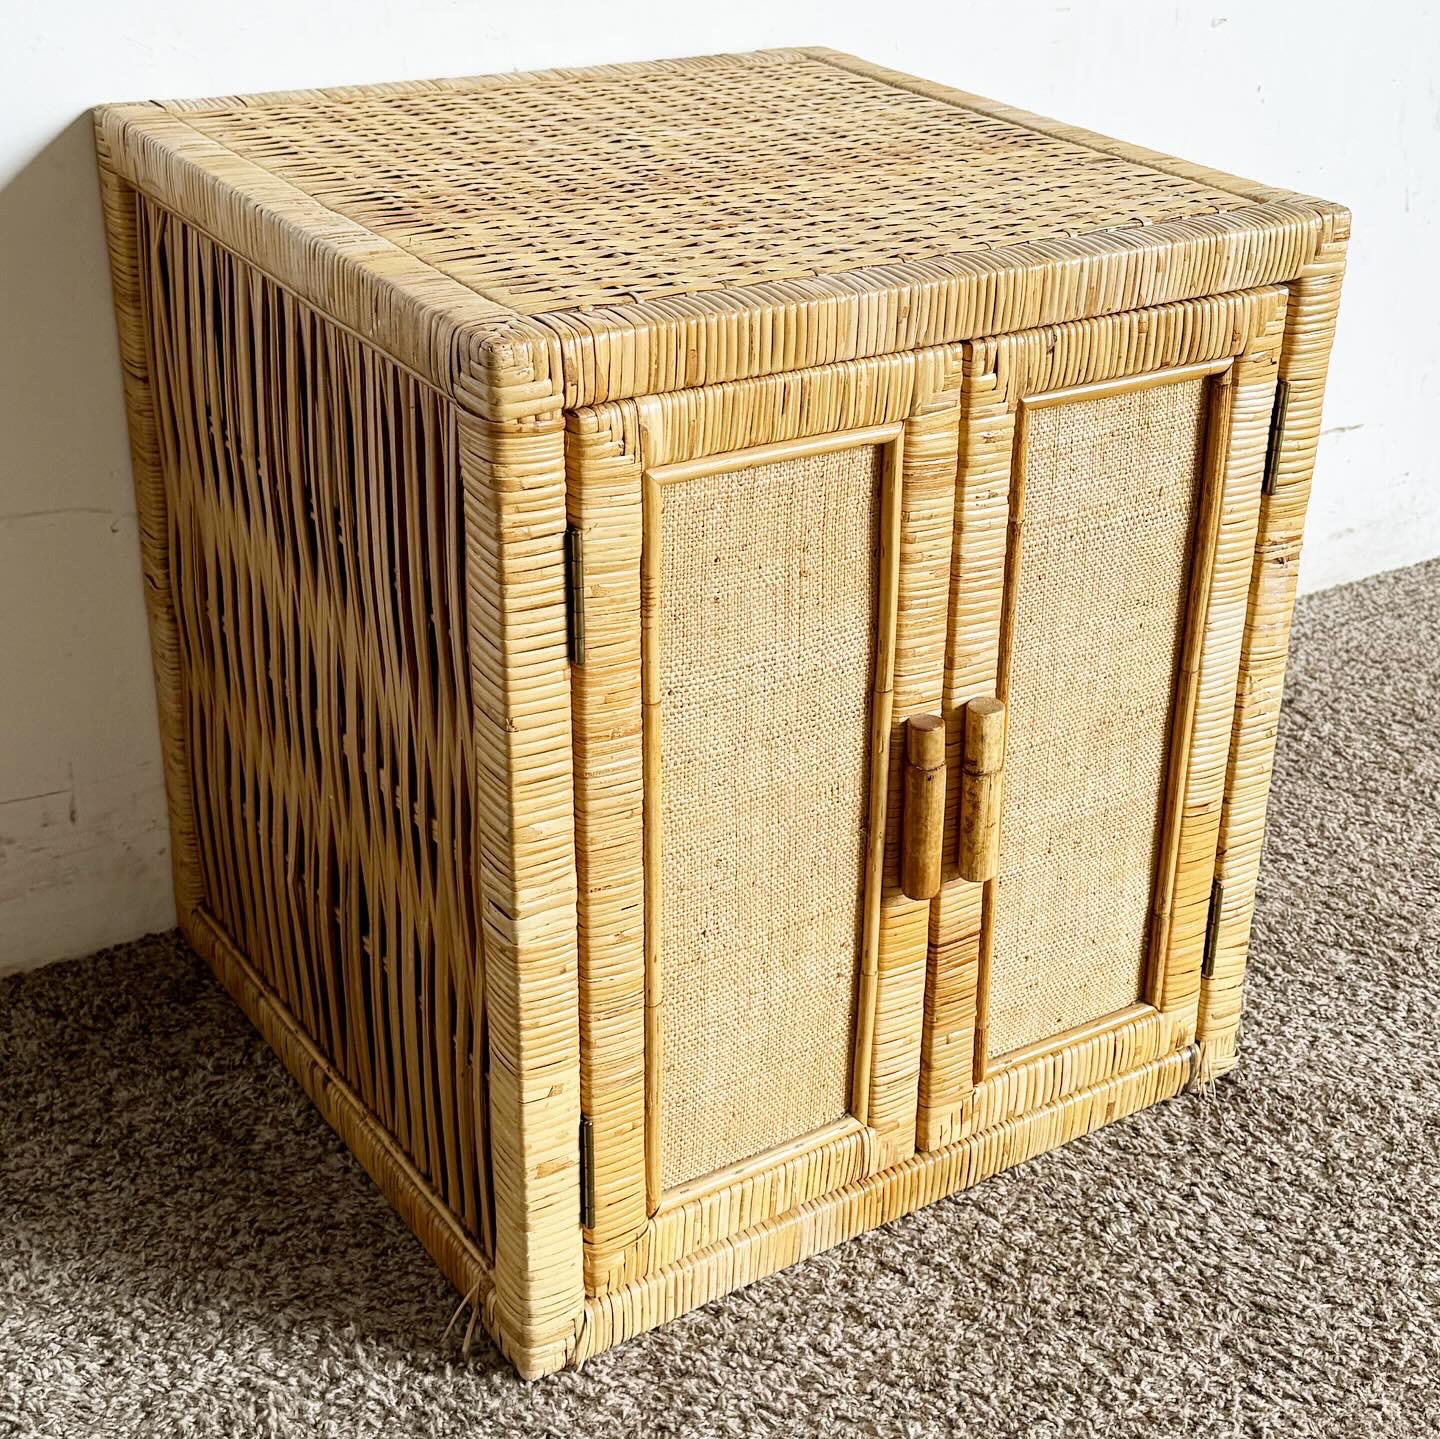 Discover the Boho Chic Wicker and Rattan Cubic Cabinet, a side table/nightstand that melds functionality with an organic aesthetic. Its natural textures and cubic design offer bohemian elegance, making it a versatile addition to any bedroom or